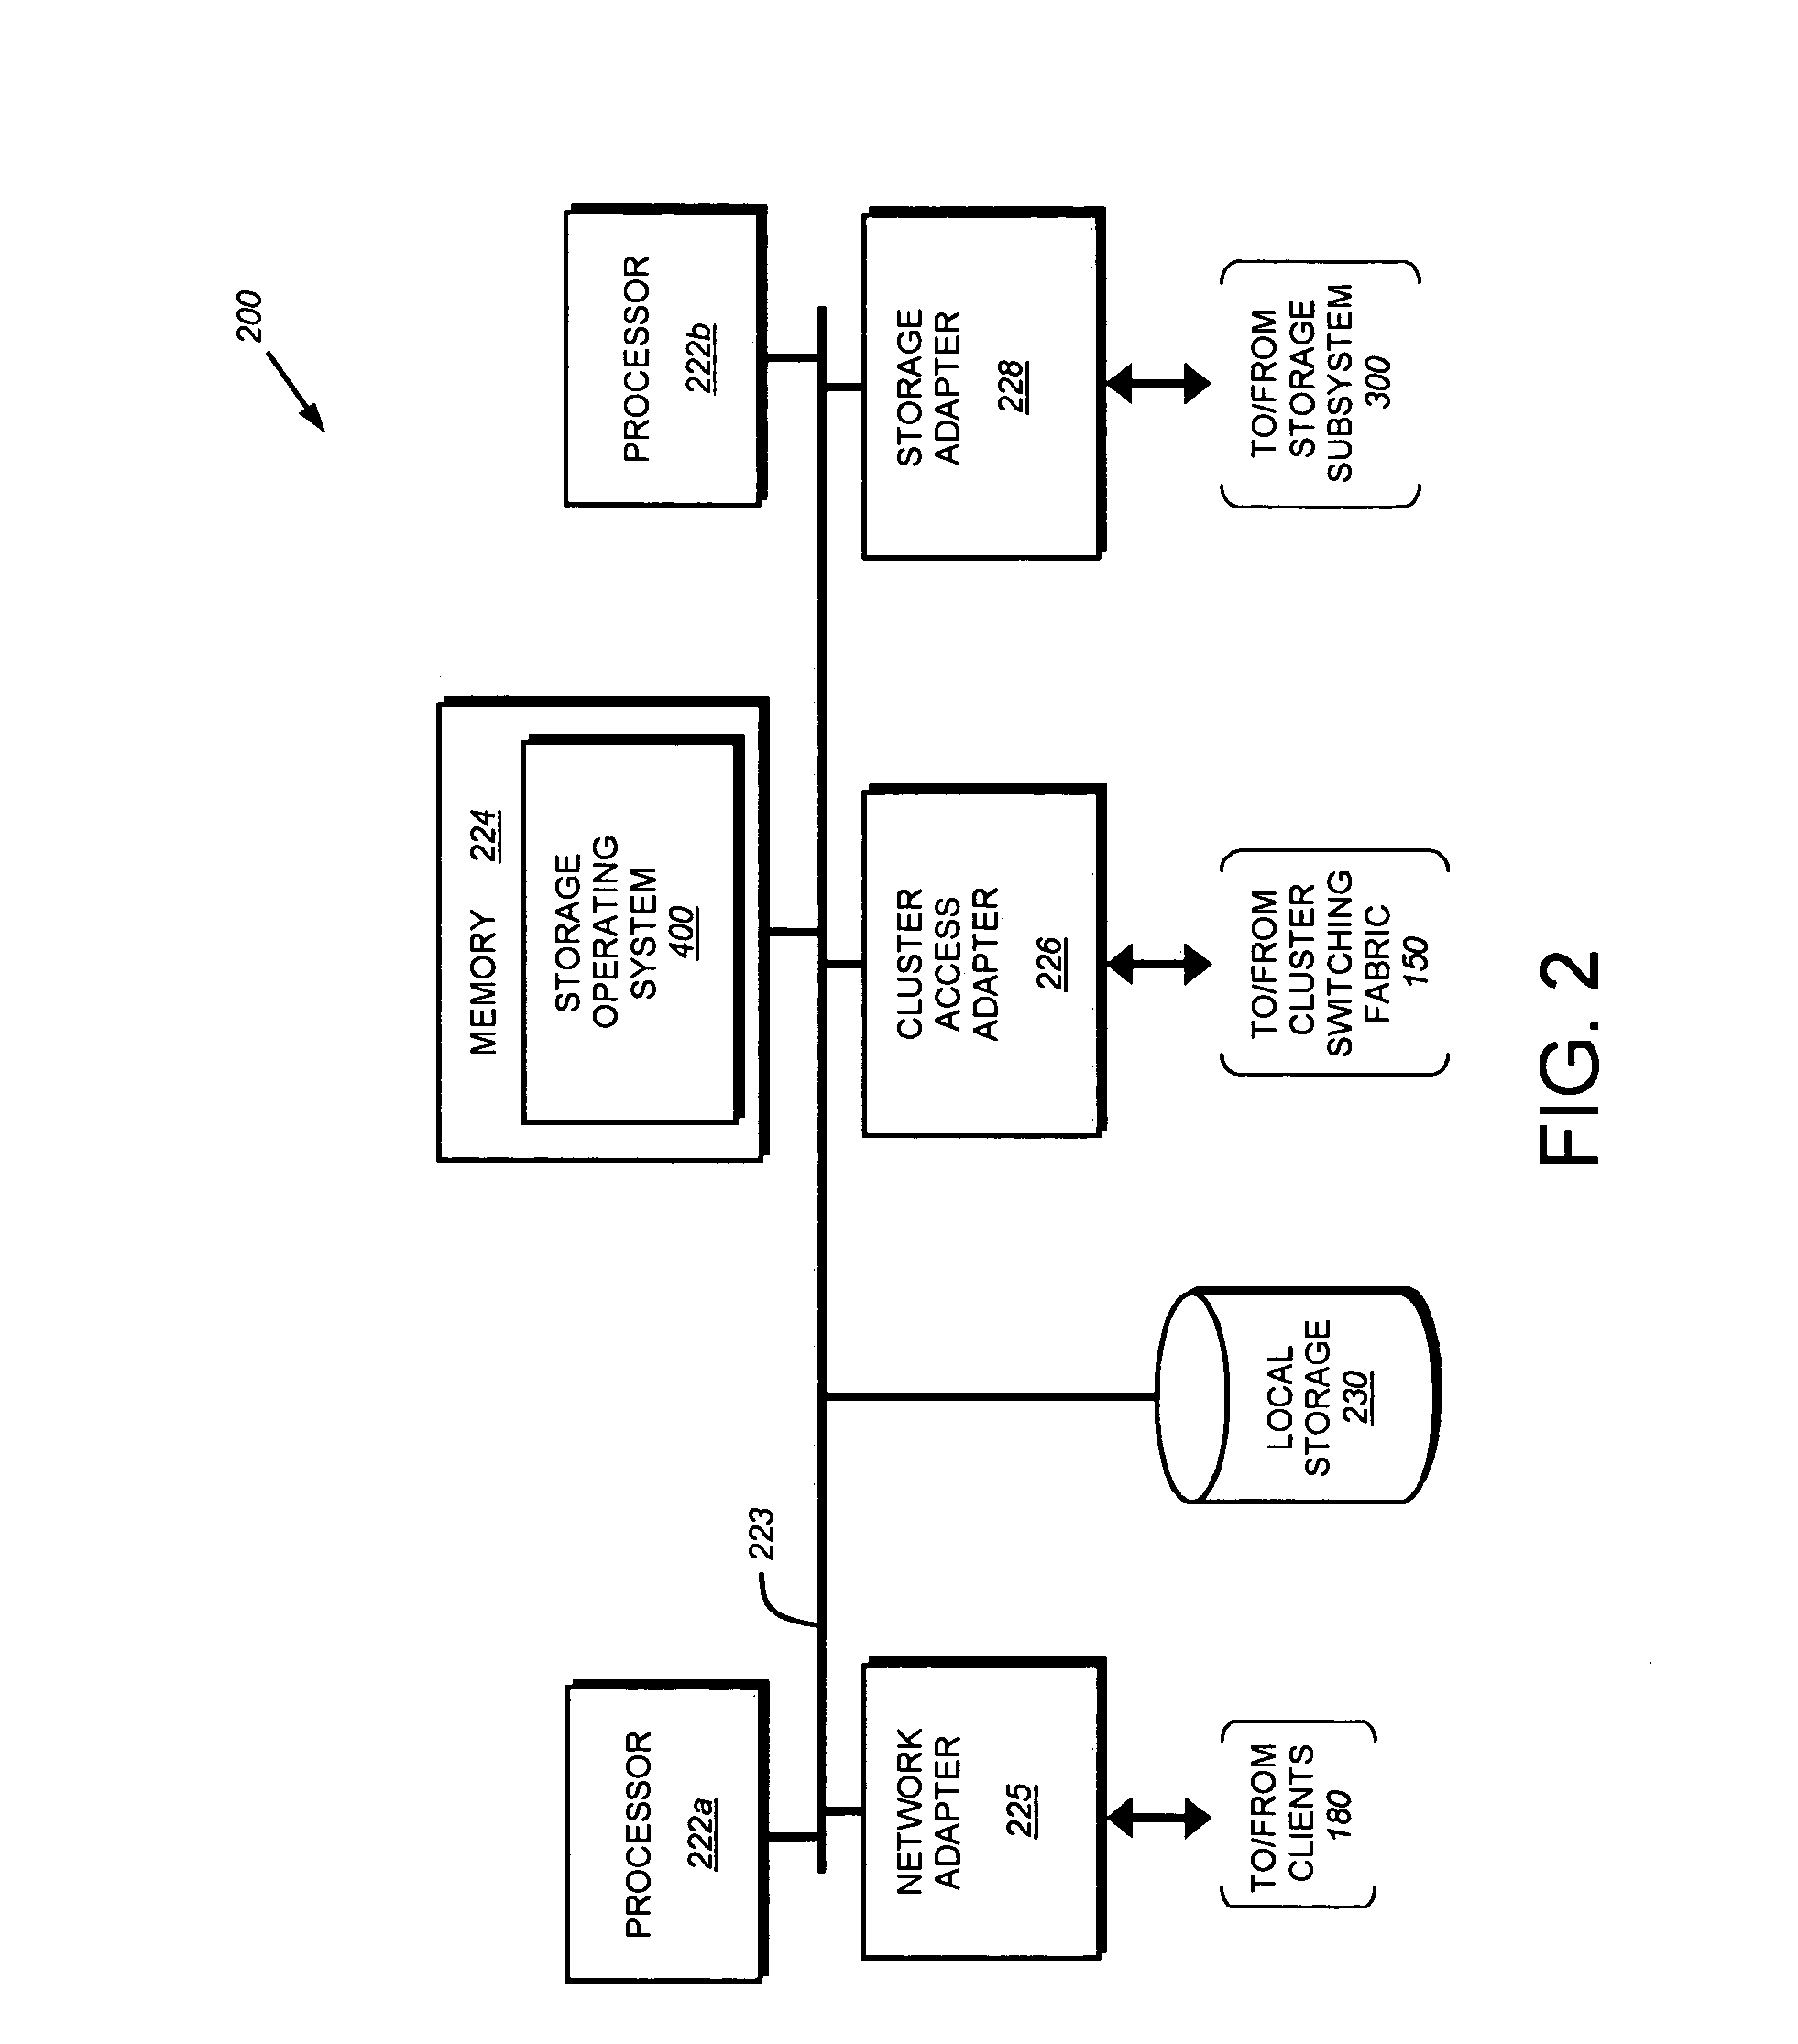 System and method for proxying network management protocol commands to enable cluster wide management of data backups